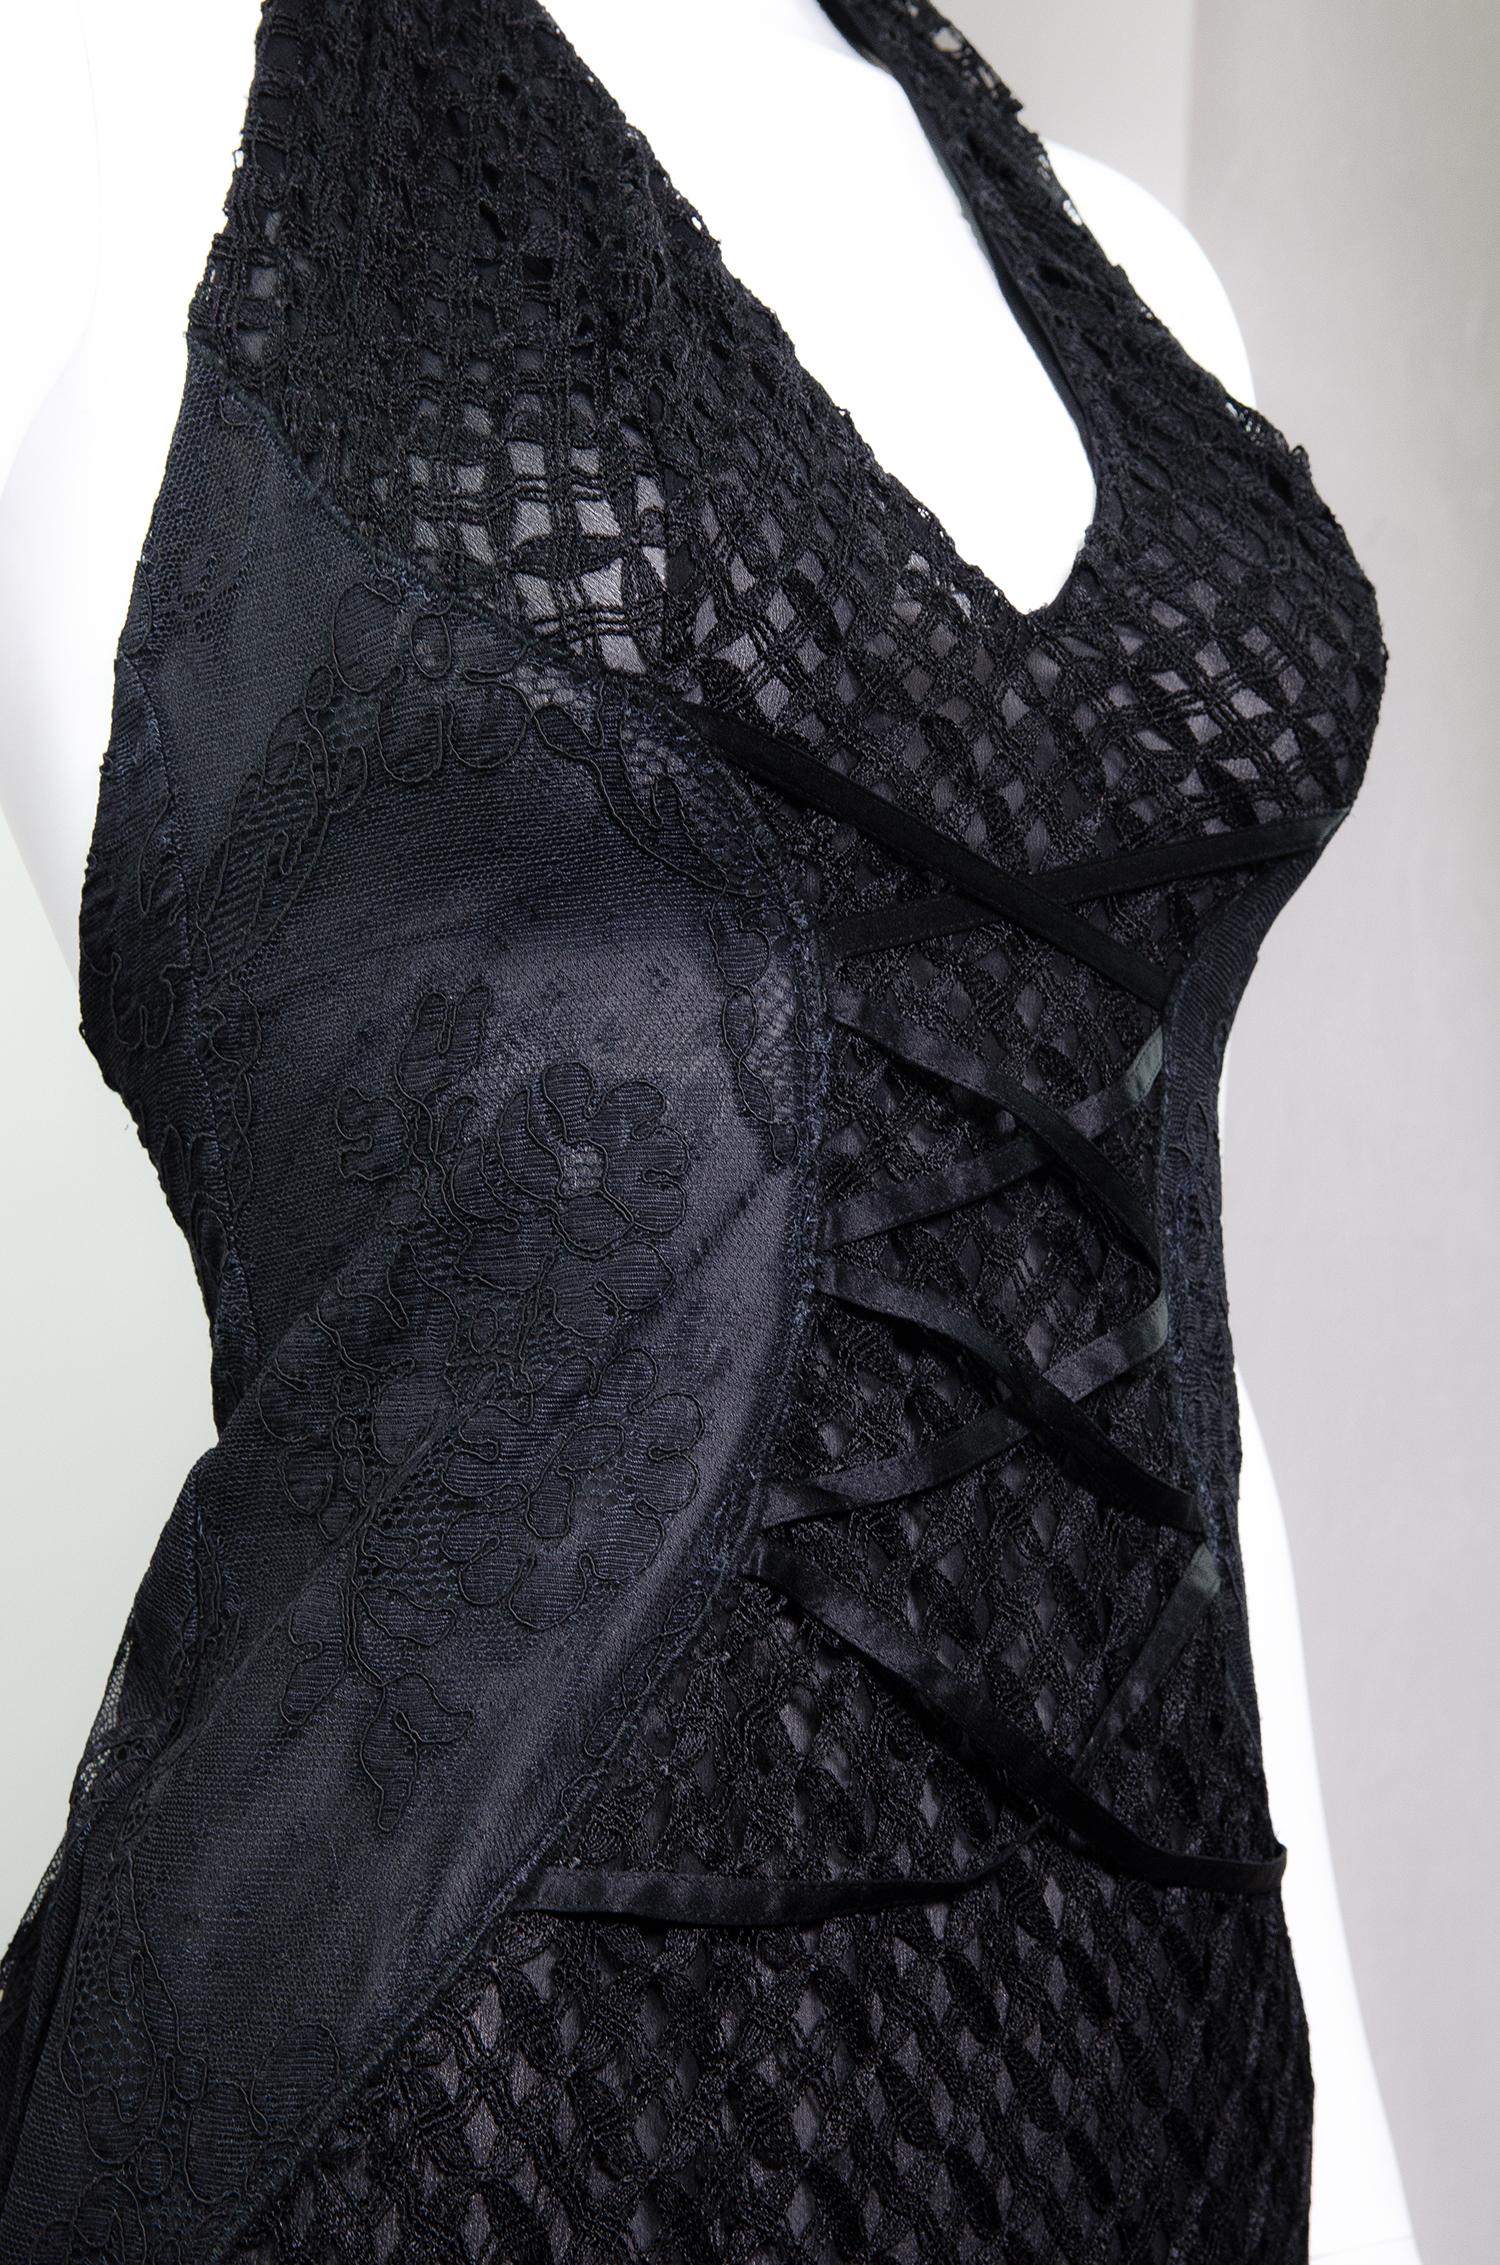 VERSACE S/S 2002 Vintage Sheer Lace Knit Gown  6